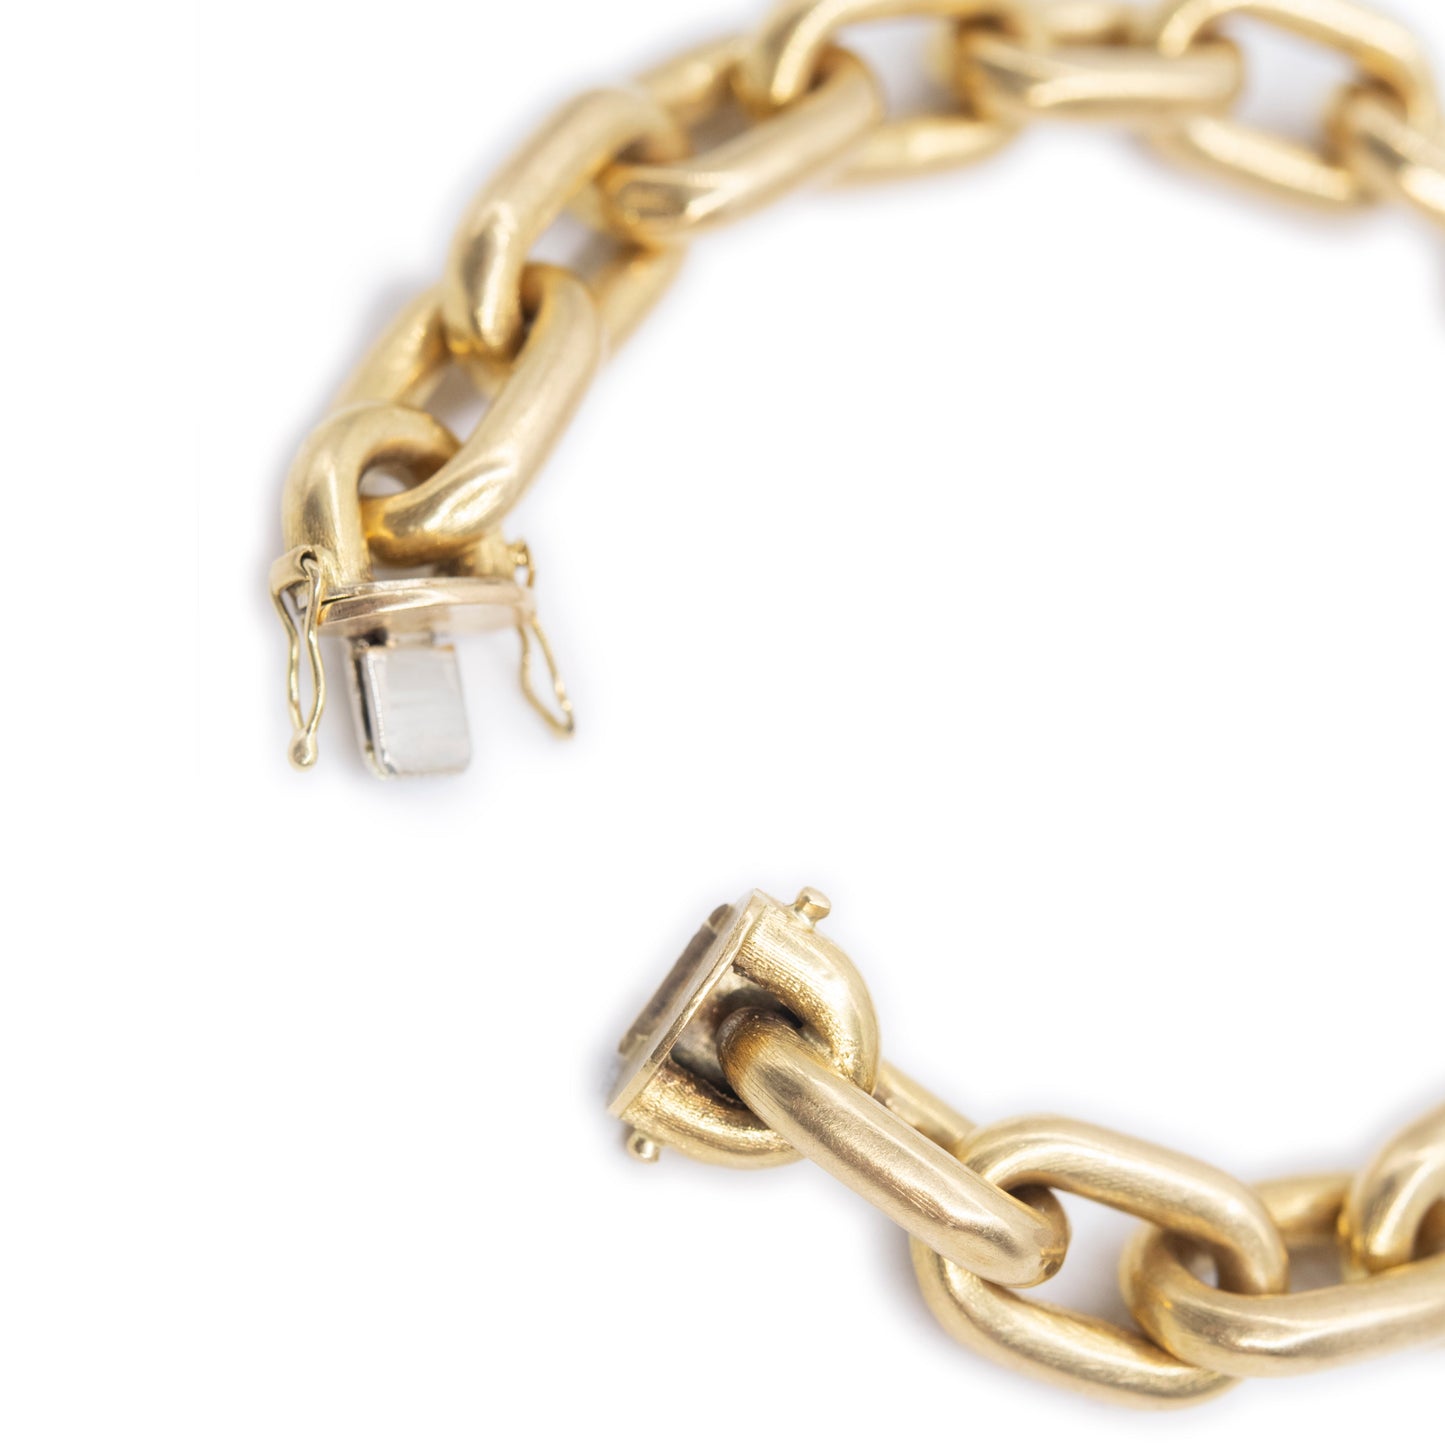 Vintage Gold Bracelet For Women from 18ct Solid Yellow Gold | Andrea | Vintage jewelry | Lil Milan